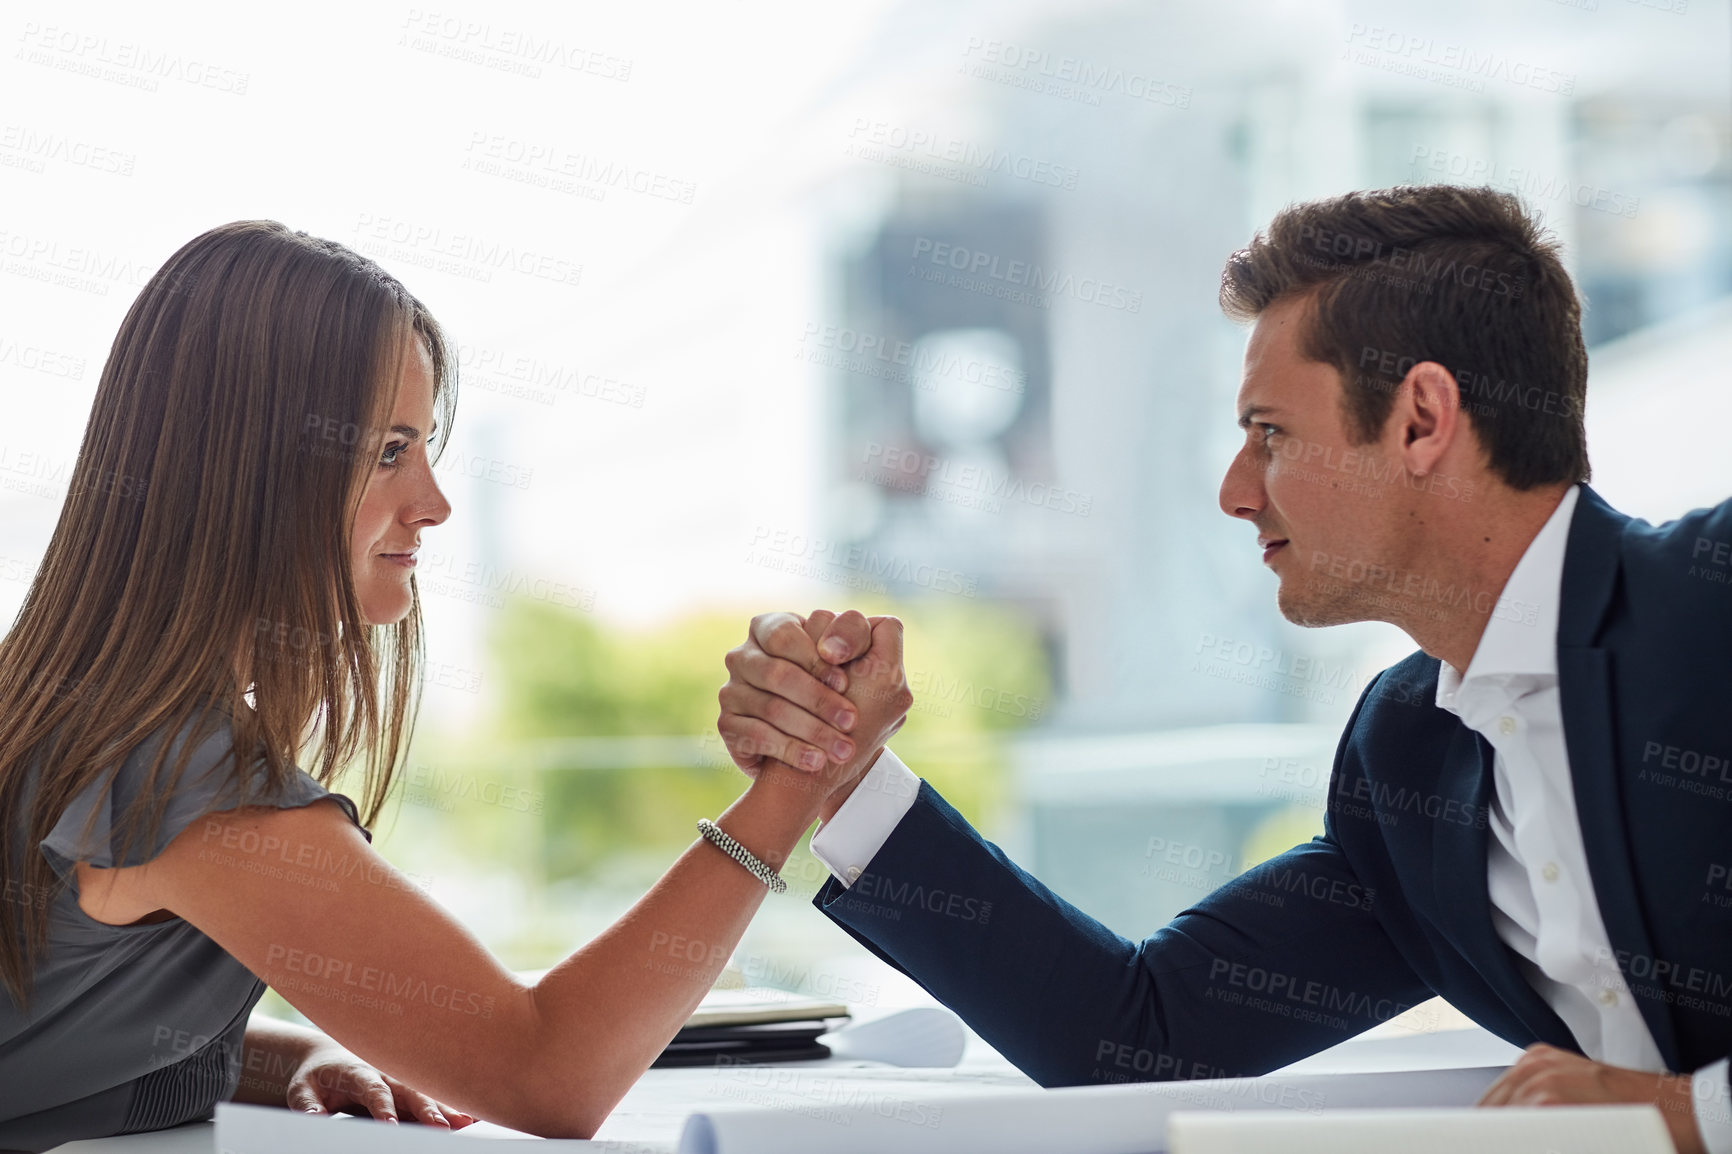 Buy stock photo Shot of two businesspeople arm wrestling in an office